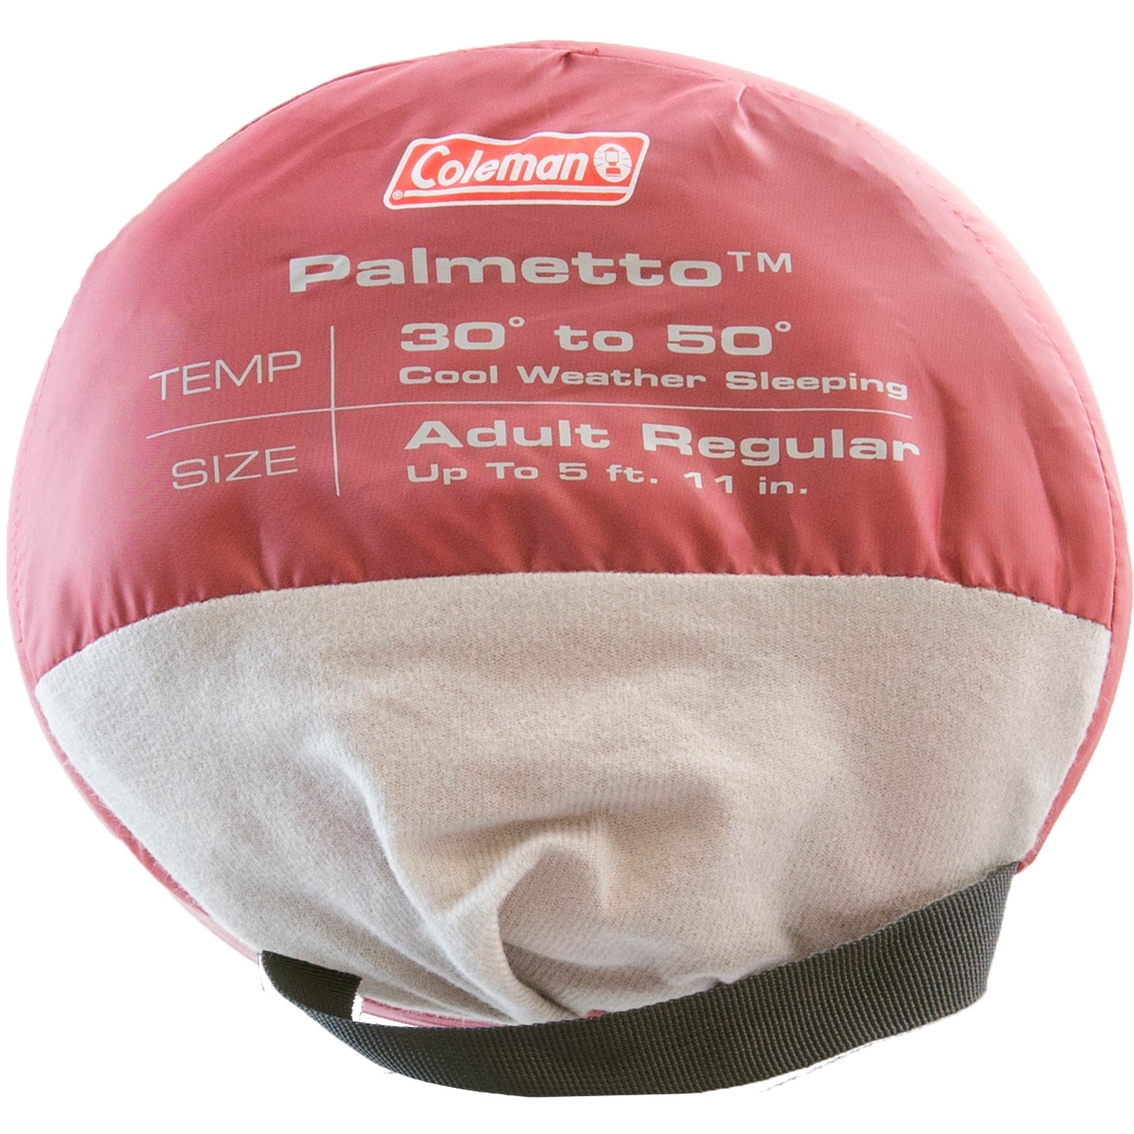 Coleman Palmetto Cool Weather Sleeping Bag - Image 4 of 4